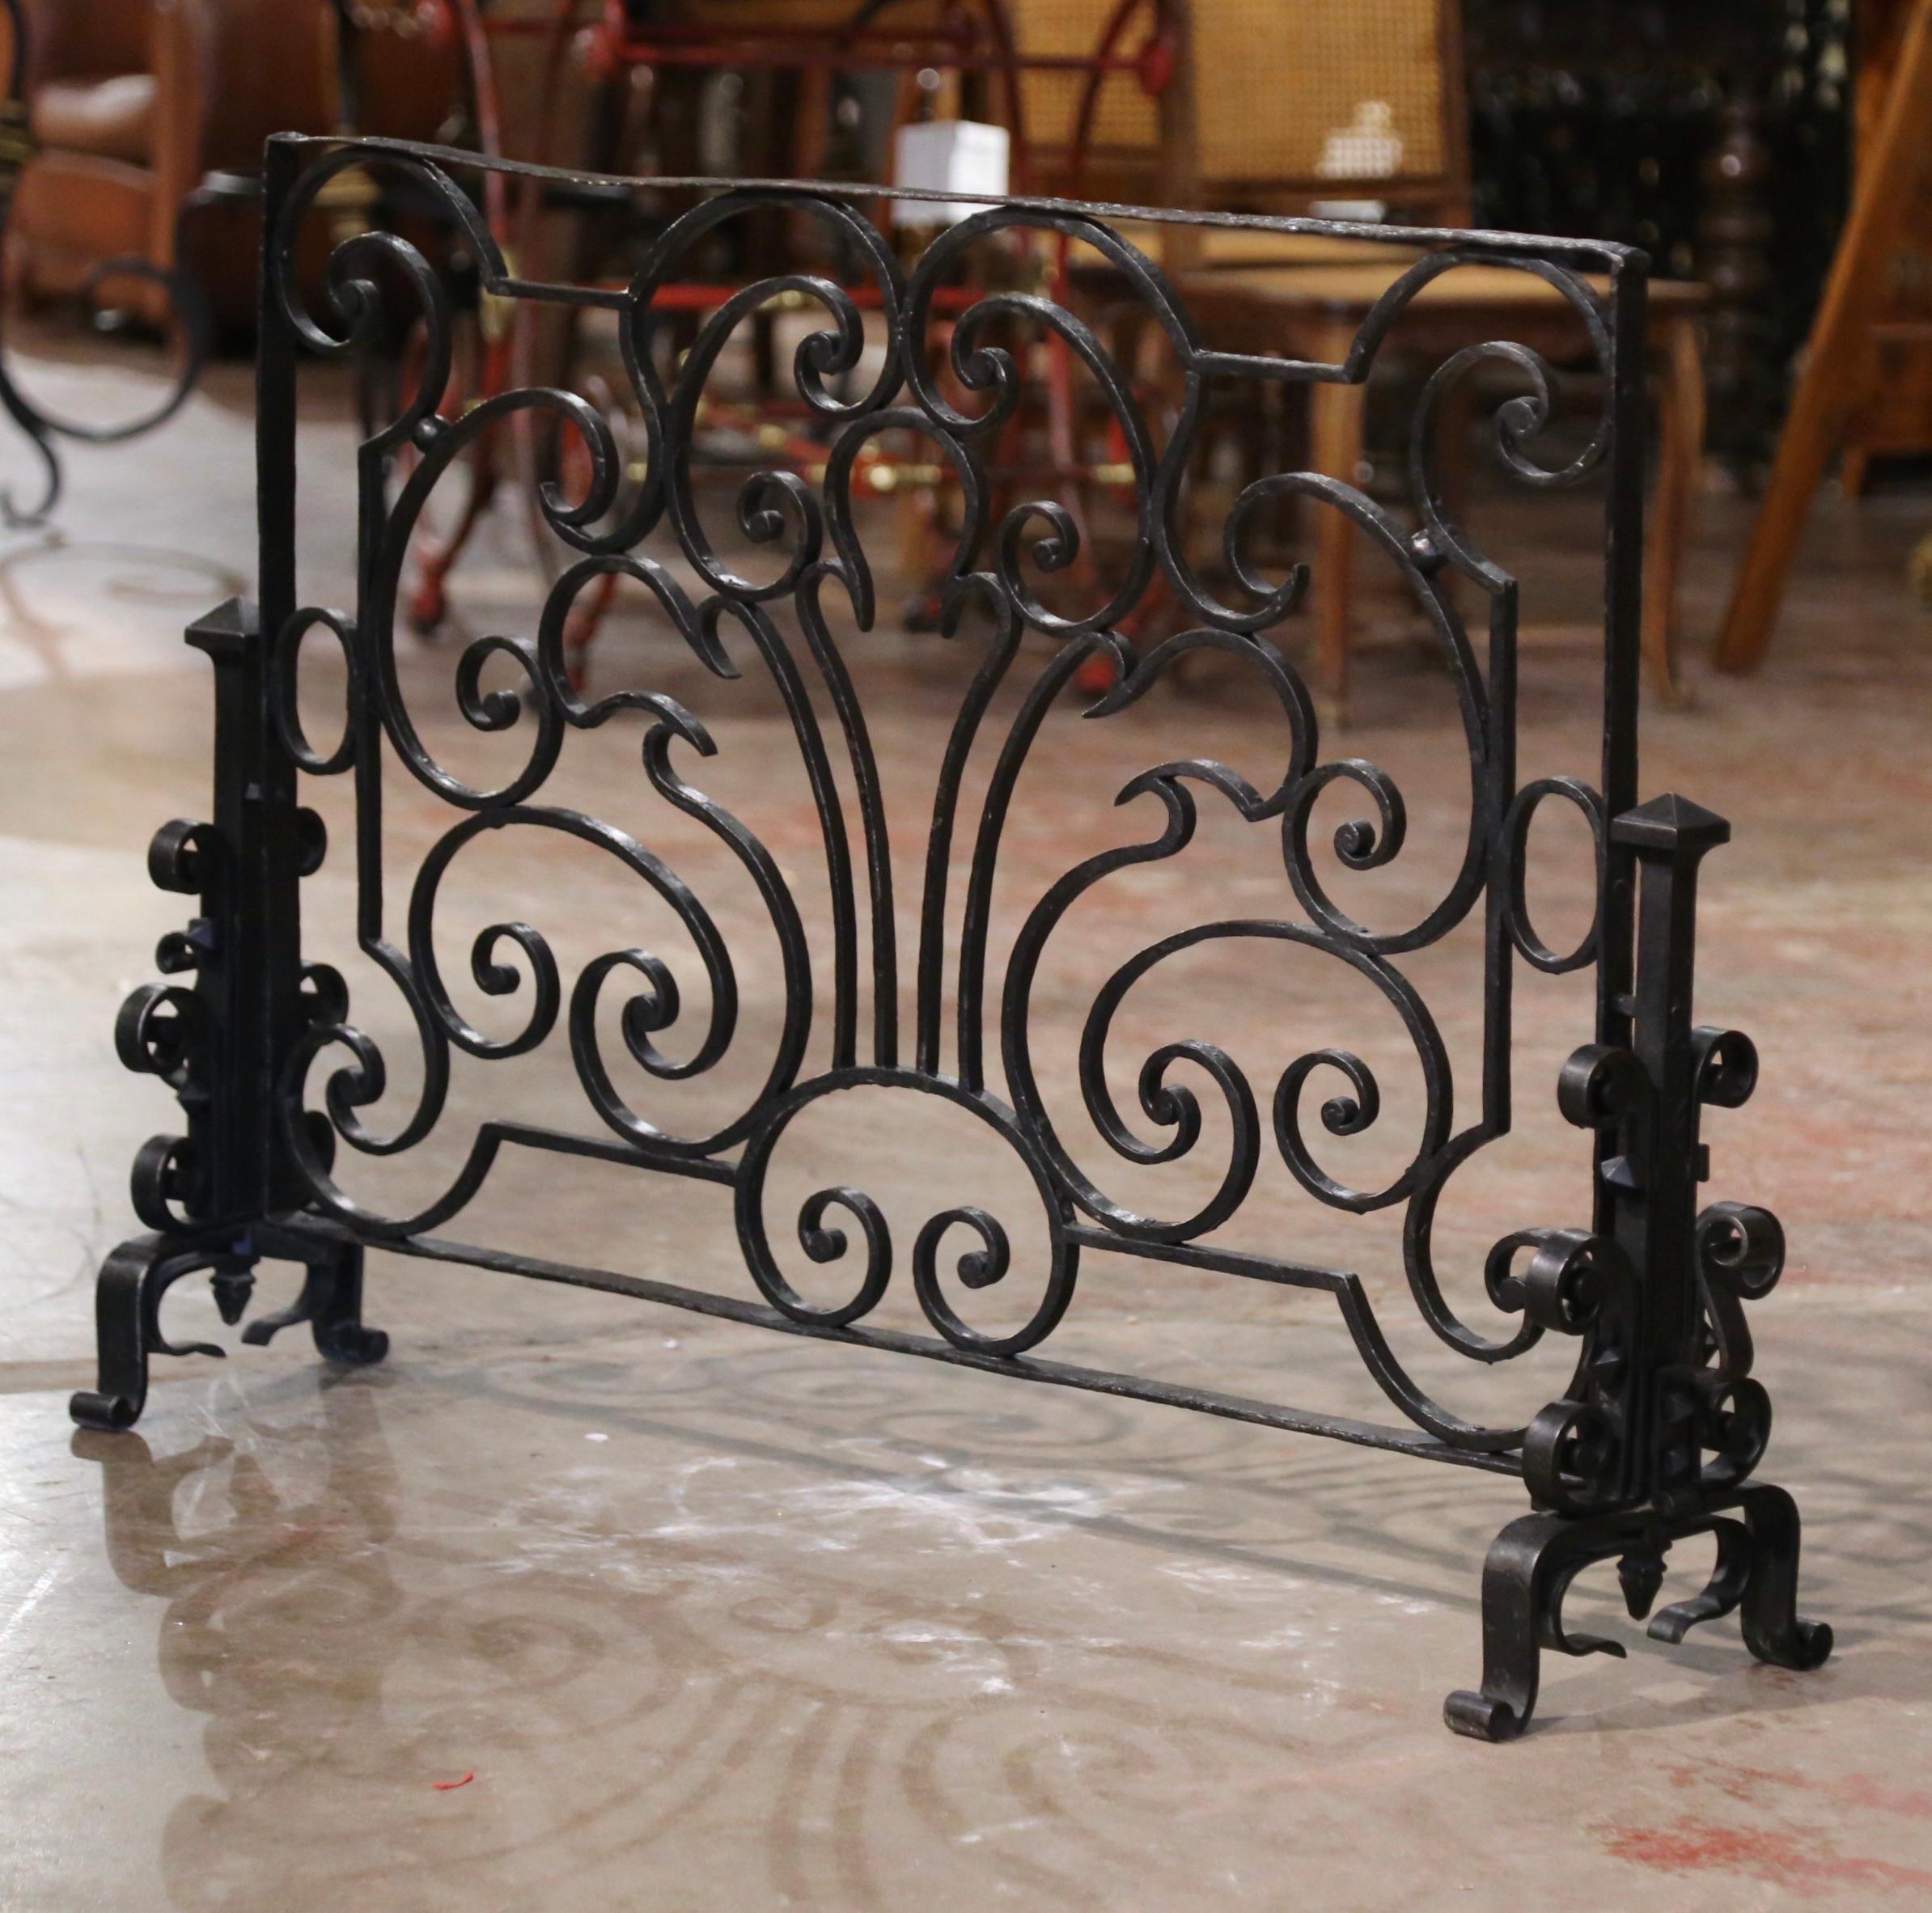 Decorate a fireplace hearth with this elegant freestanding antique hammered iron screen. Hand forged in France circa 1860, the tall wrought iron screen stands on curved feet at each end and features decorative scroll motifs throughout. The heavy